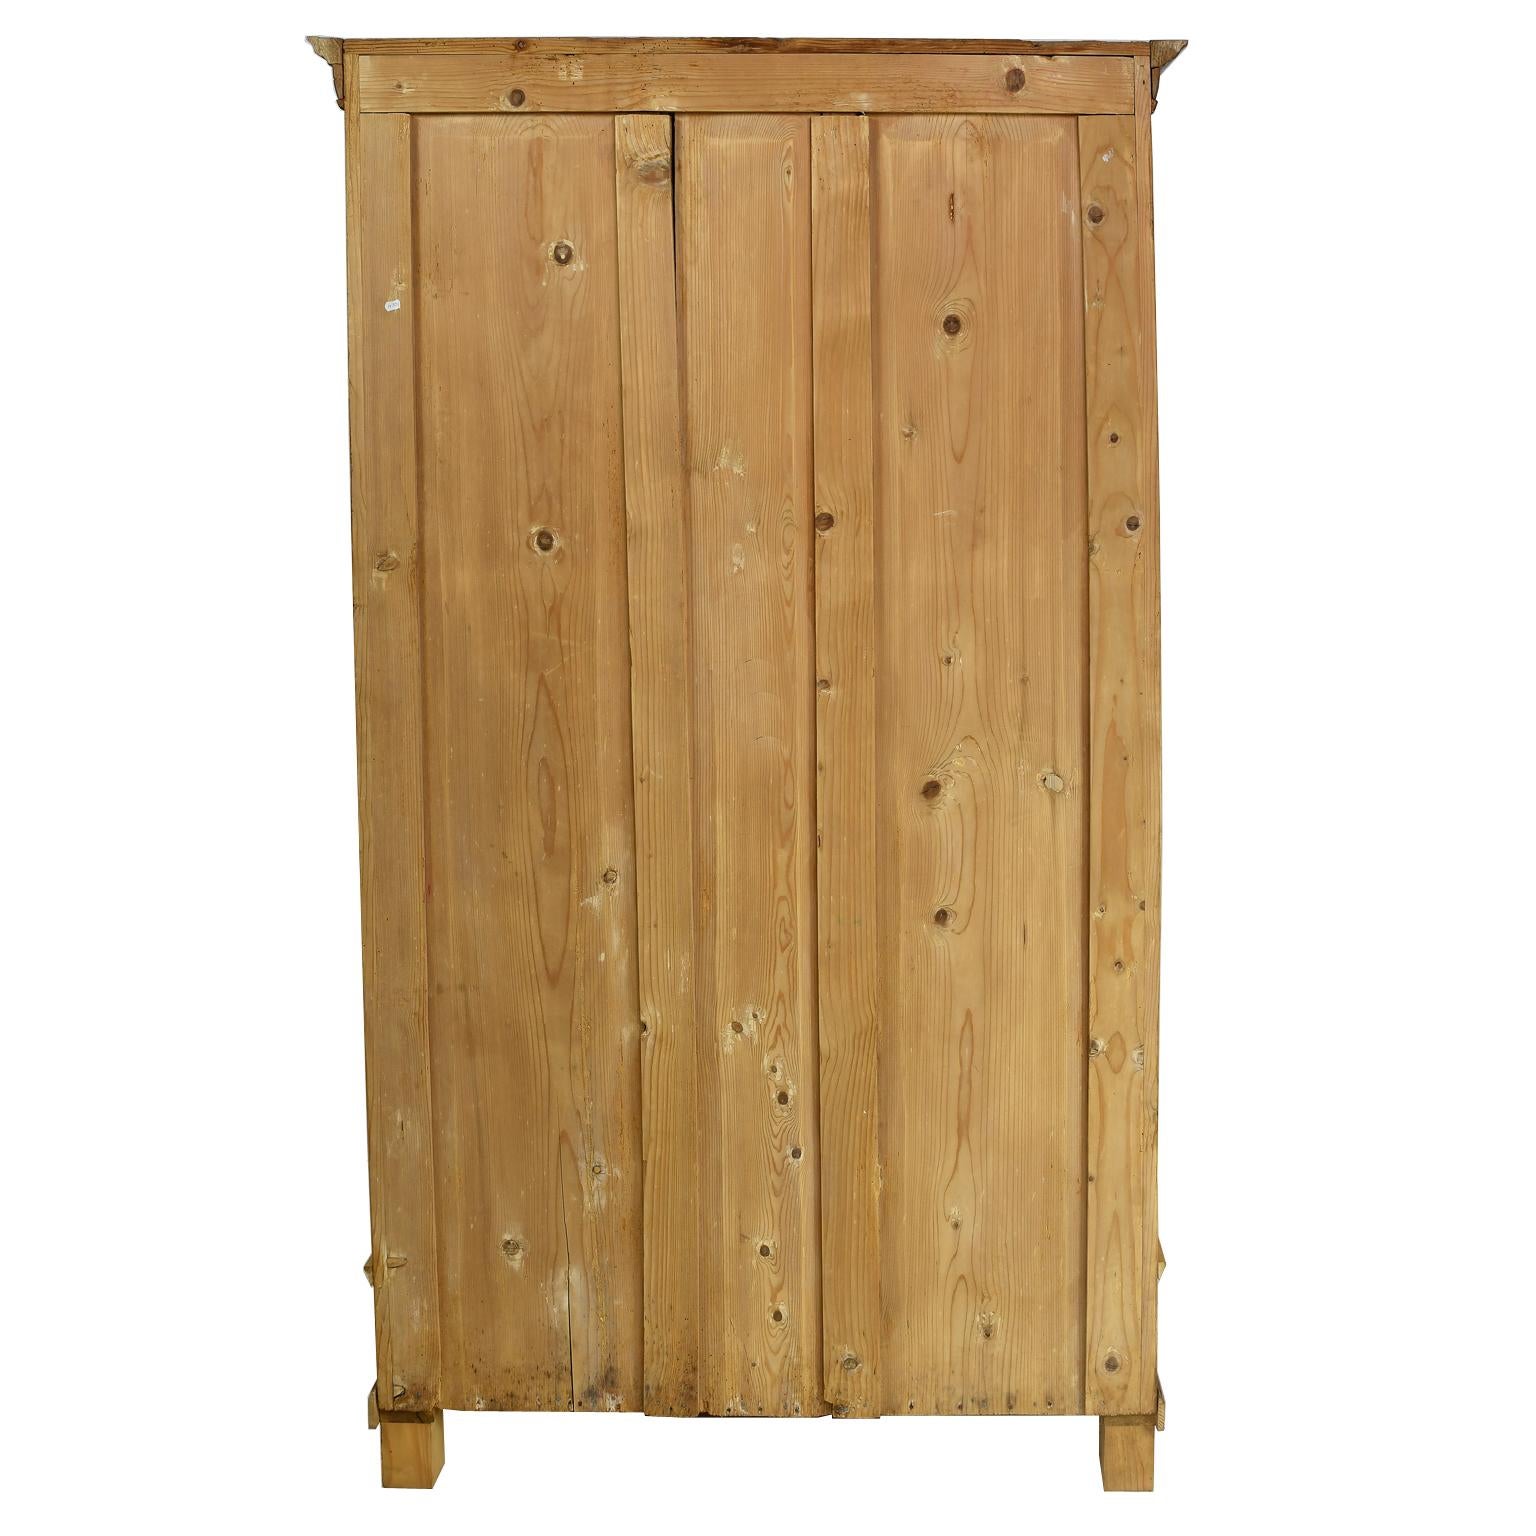 Austrian/ Hungarian Rustic Pine Armoire, circa 1840 with Parliament Hinges 4